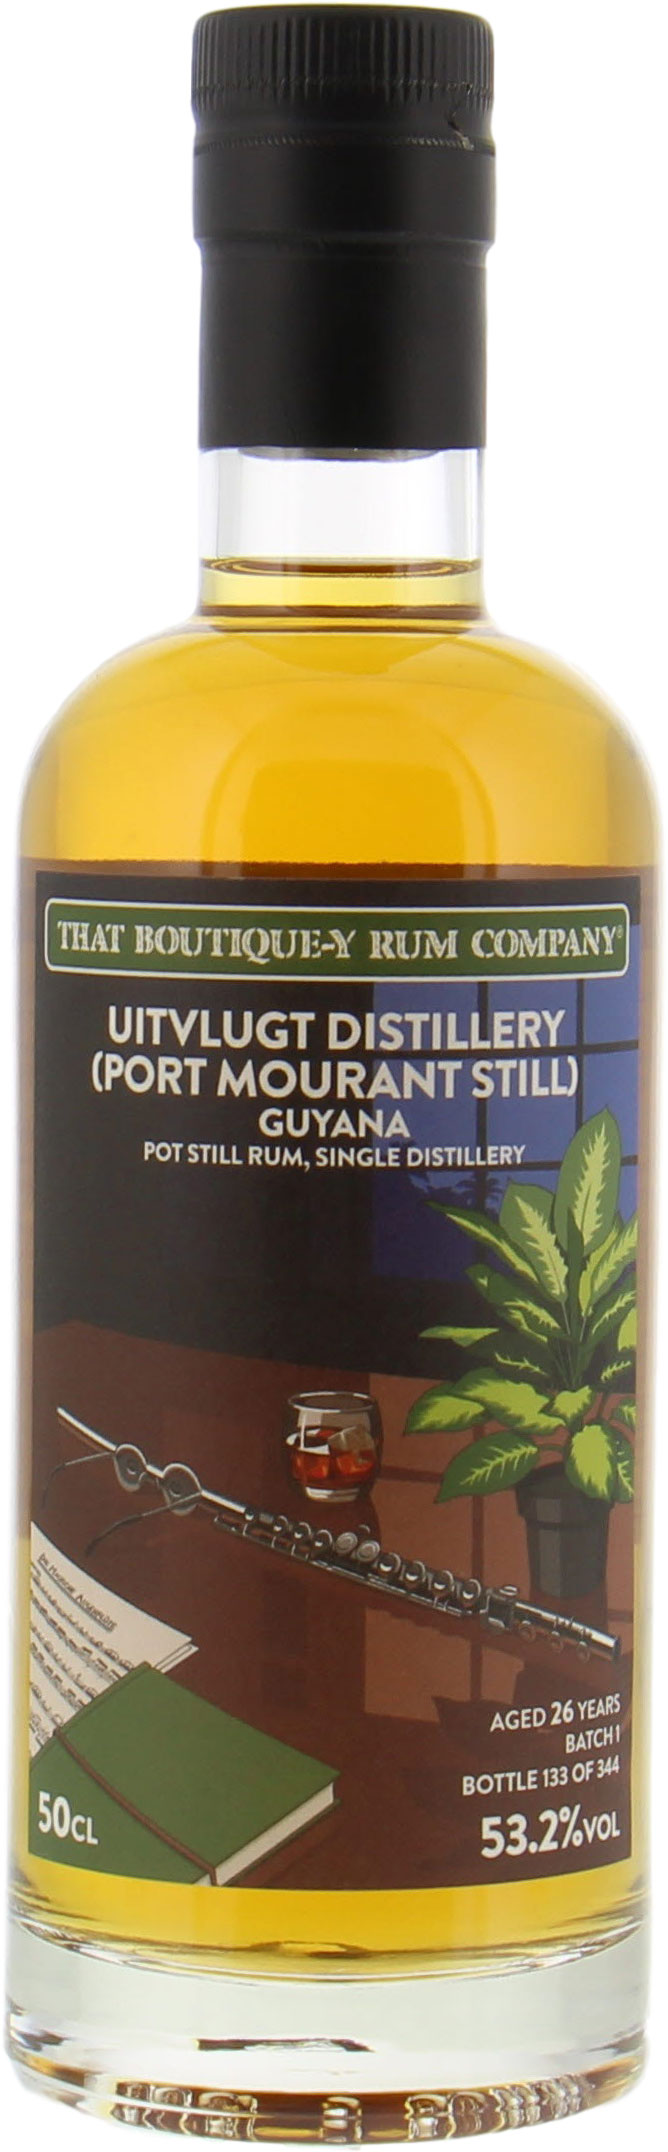 Uitvlugt - 26 Years Old That Boutique-y Rum Company Batch 1 53.2% NV Perfect